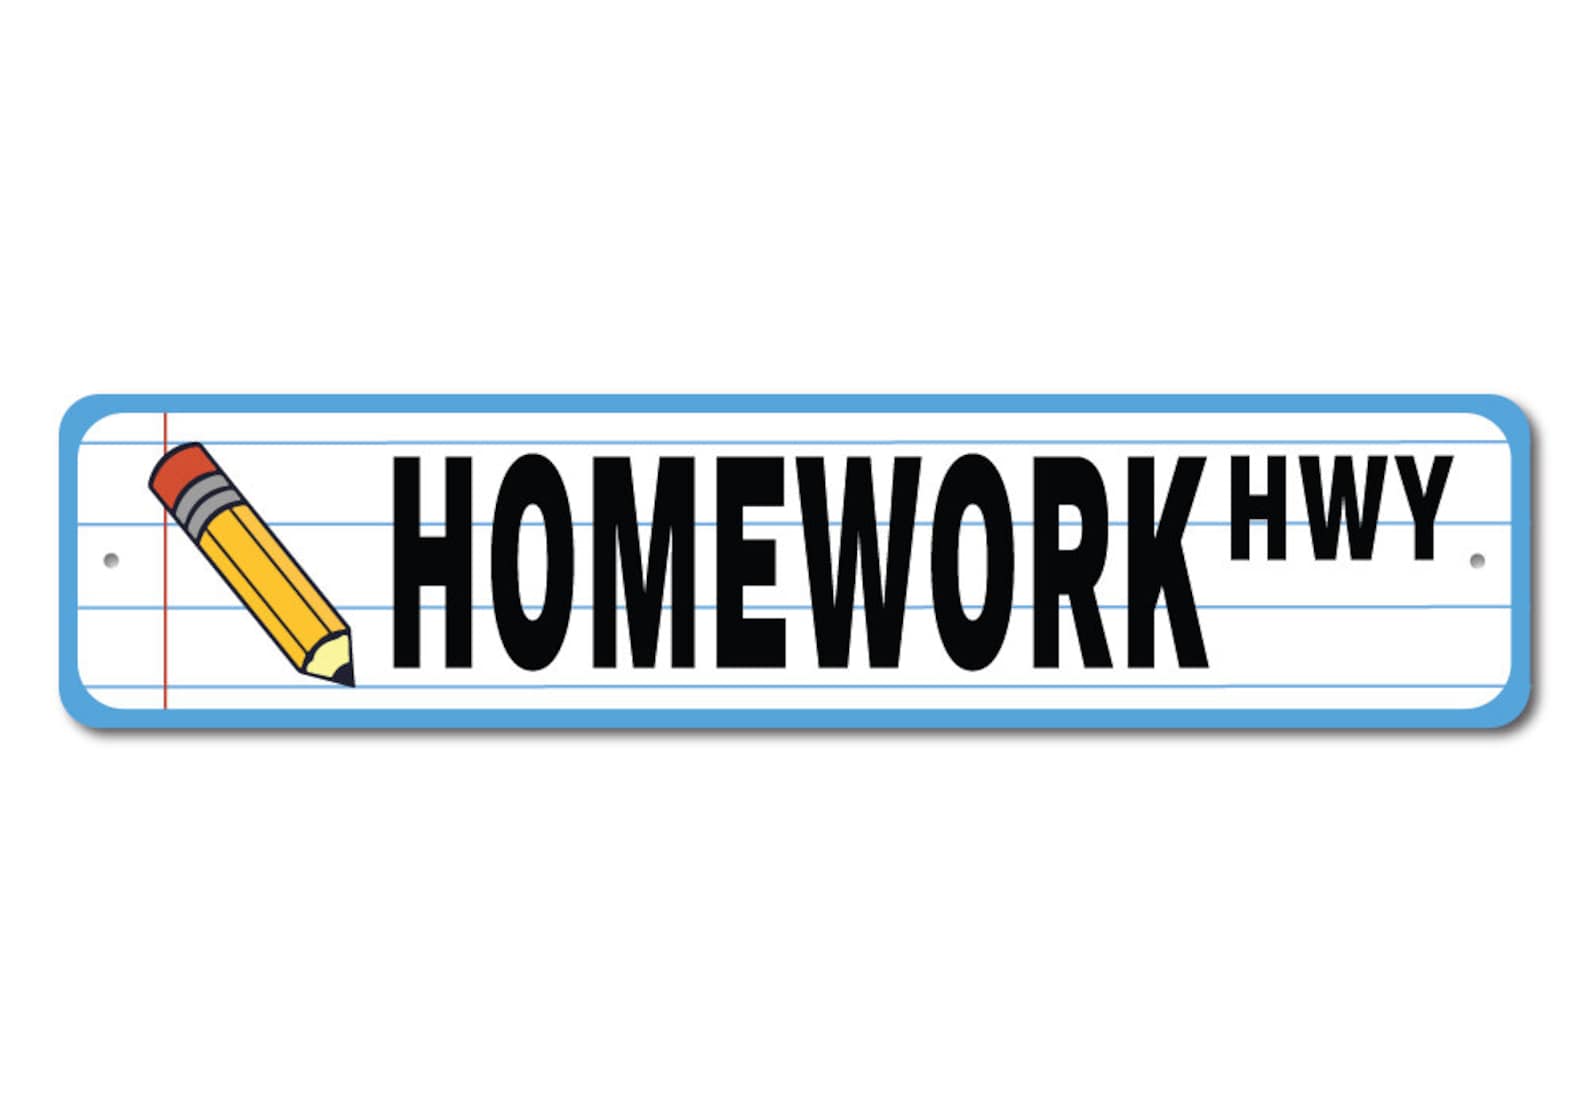 what is homework in sign